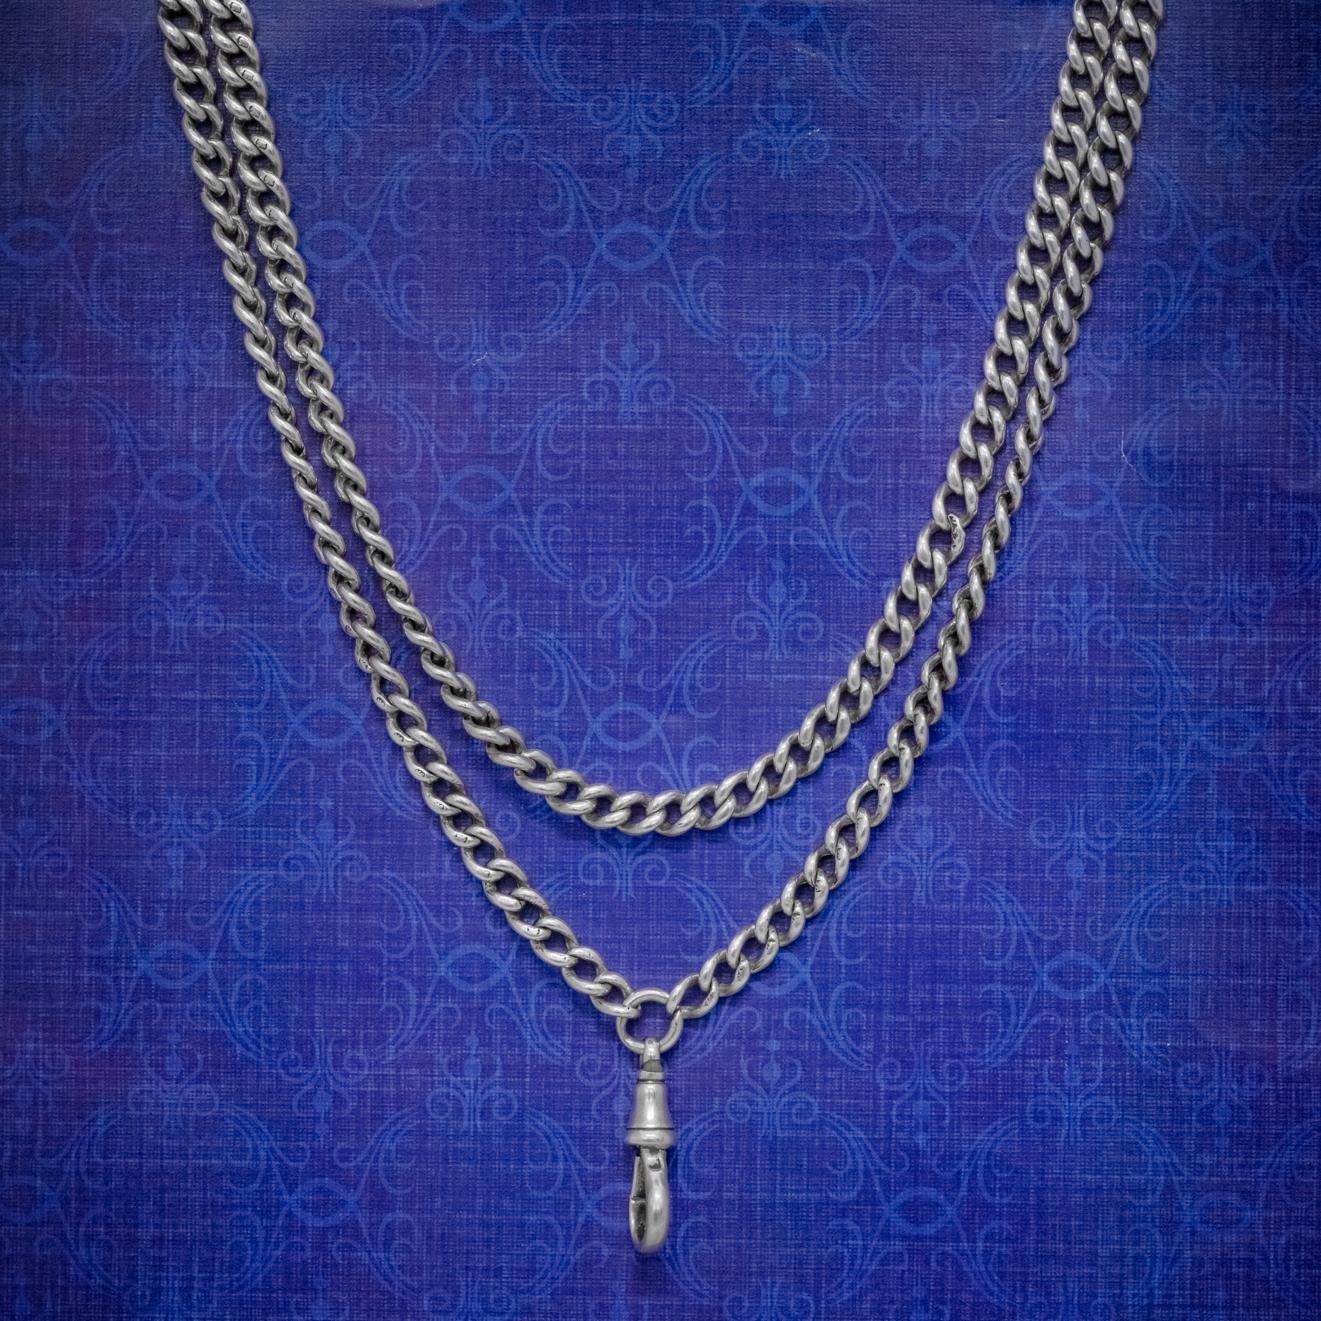 This solid, late Victorian guard chain is made up of strong Sterling Silver links each baring a Lion hallmark for Sterling Silver. 

The chain is complete with a ring clasp at the end which may have been used to attach a pocket watch or a cylinder